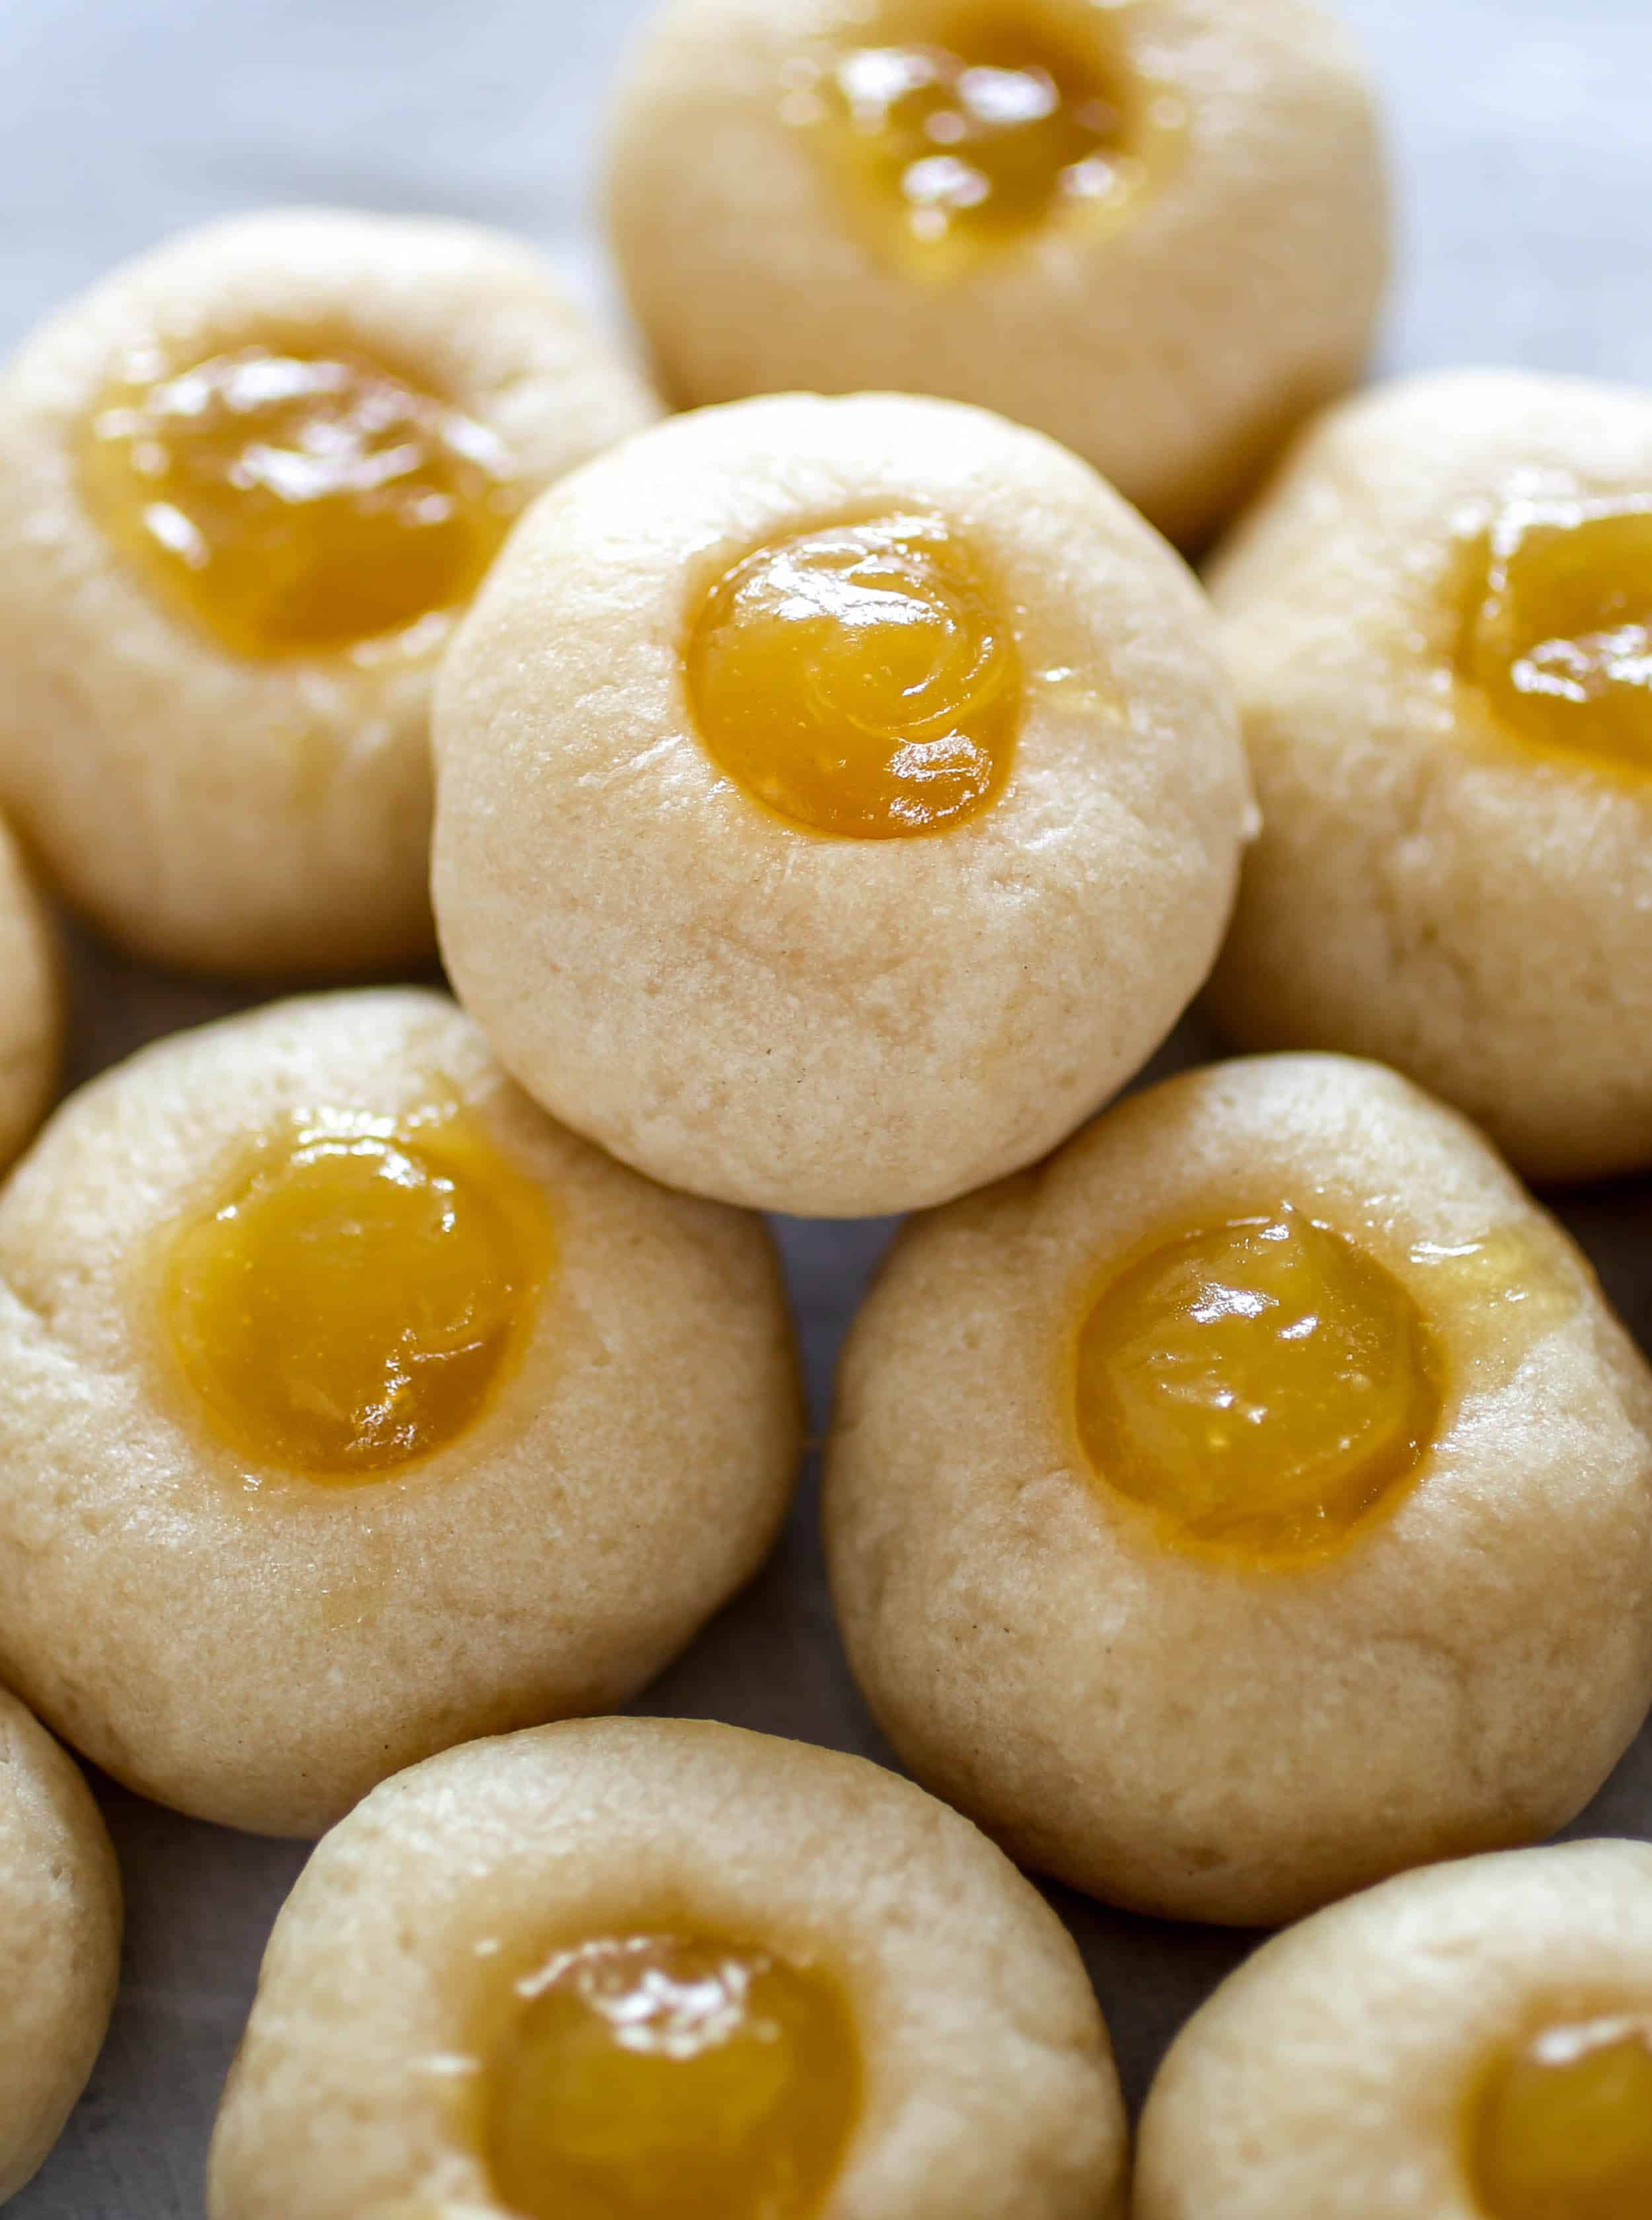 Lemon-Lime Thumbprint Cookies - You'll find sweet, tart and tangy flavors in these delicious little cookies made with homemade lemon-lime curd!